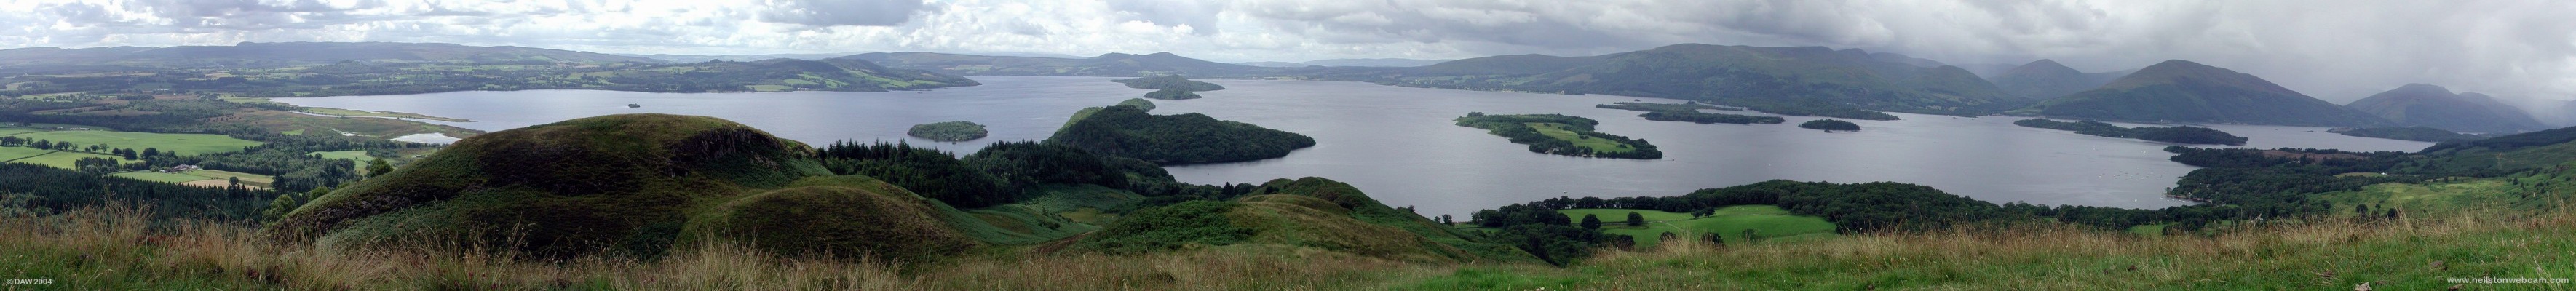 Panoramic view from Conic Hill, Loch Lomond
A view over the southern end of Loch Lomond.  The photo is taken standing on the divide between Lowland and Highlind Scotland, the Highland Fault.  If you look closely you'll see a dip in the ground in the foreground around the middle of the picture that lines up with 3 or 4  of the Islands and also a dip in the Hills in the Distance.  A typical summer day with showers heading in from the North.  
